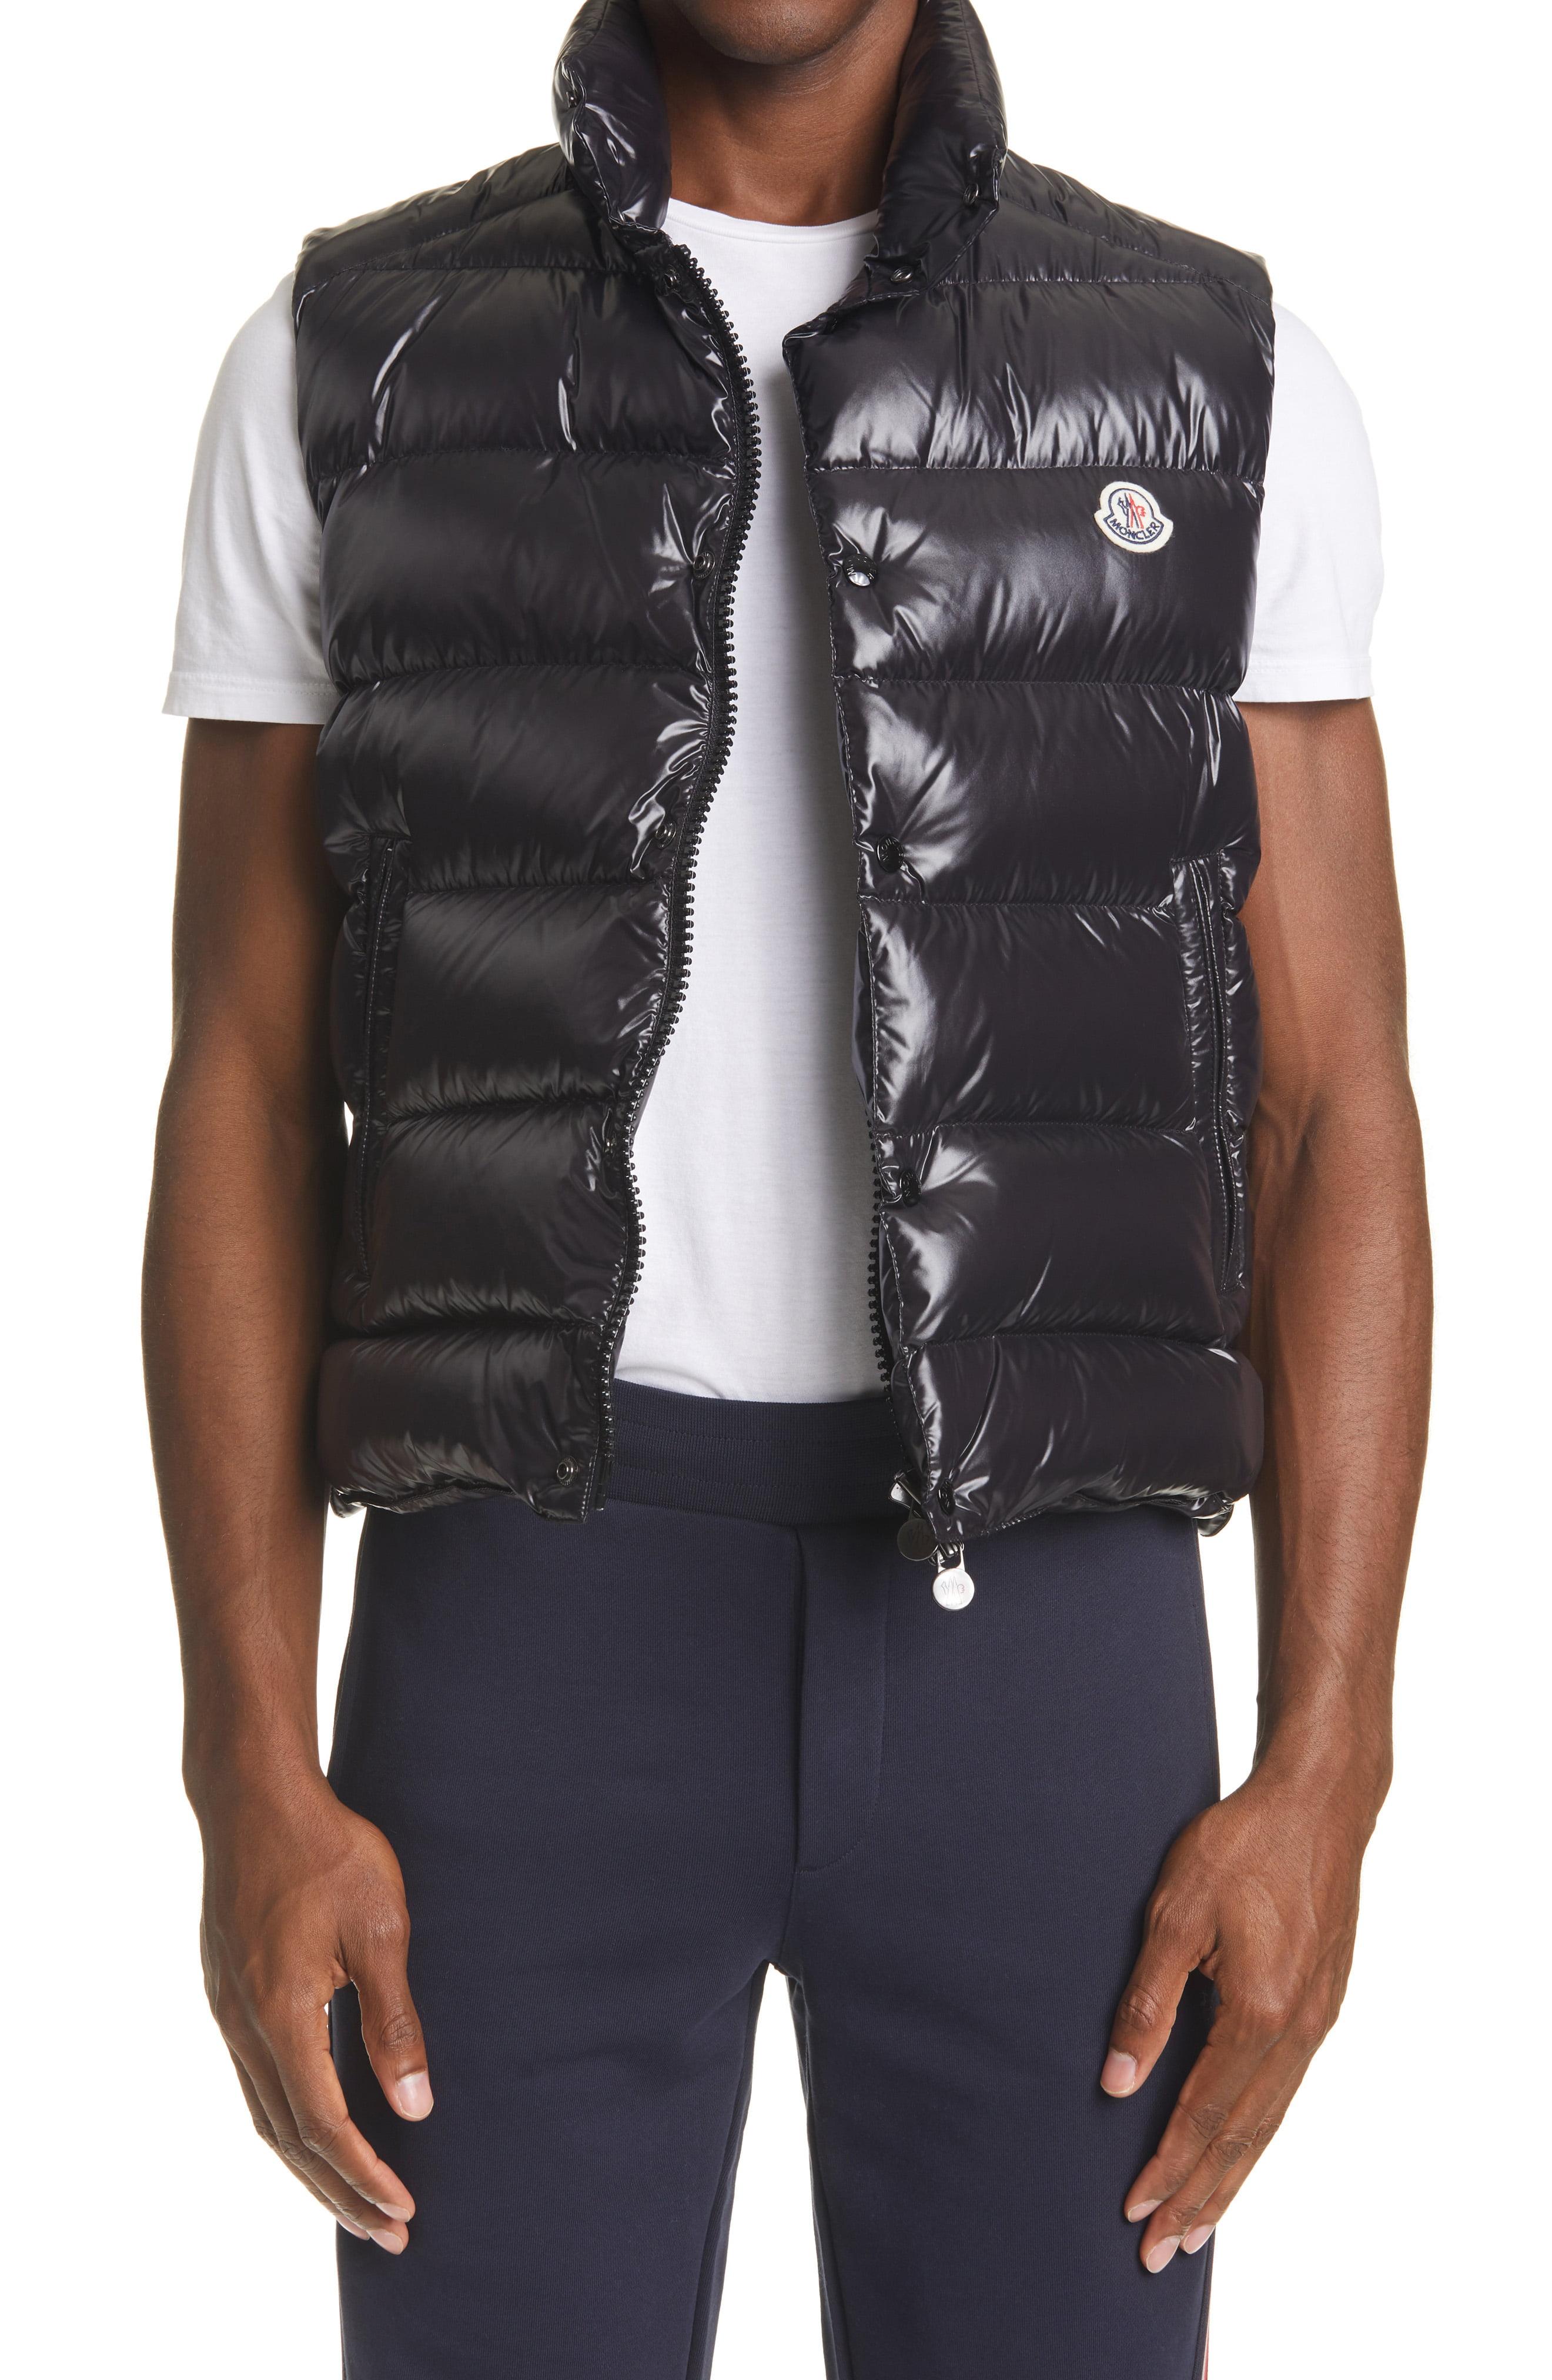 Moncler Synthetic Tib Lacquered Down Vest in Black for Men - Lyst